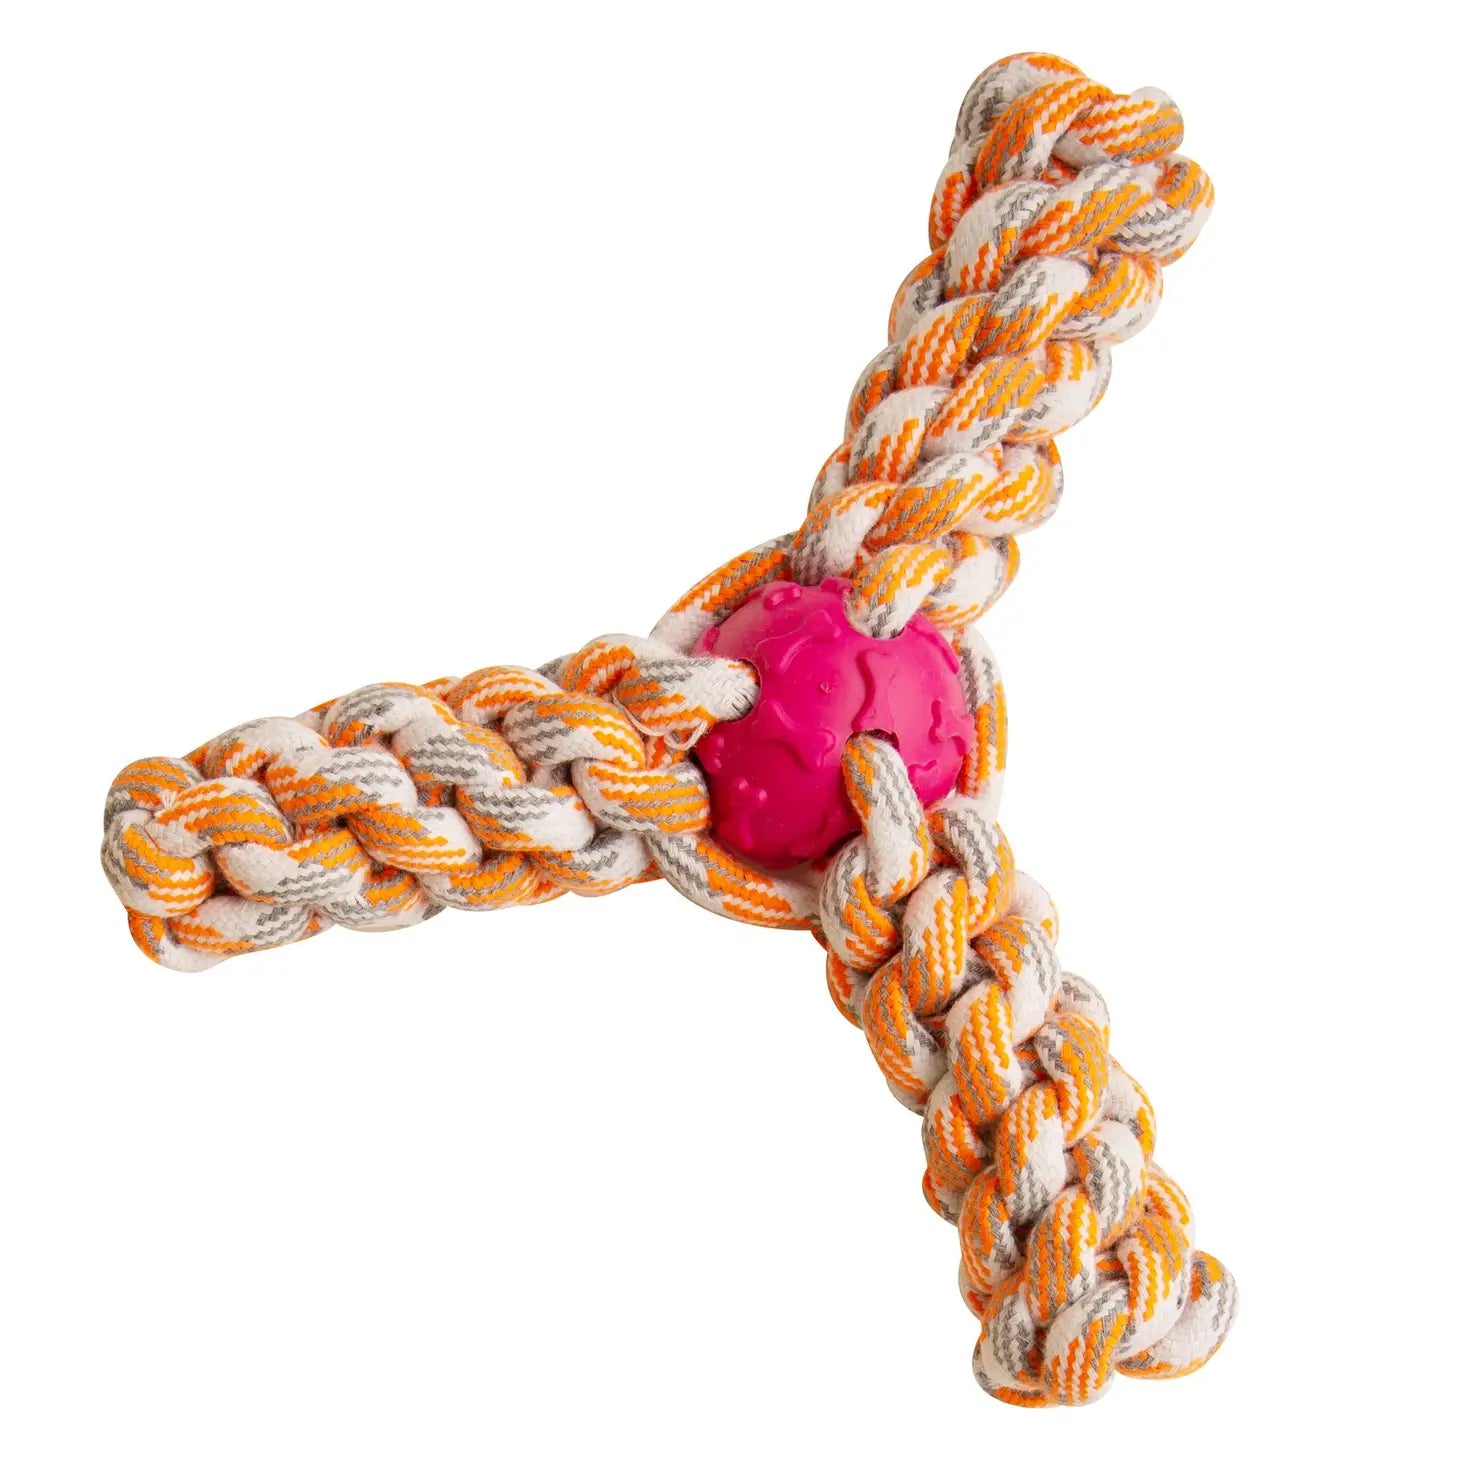 Fling N' Fun Rope Dog Toy is a braided rope dog toy with a pink ball in the center